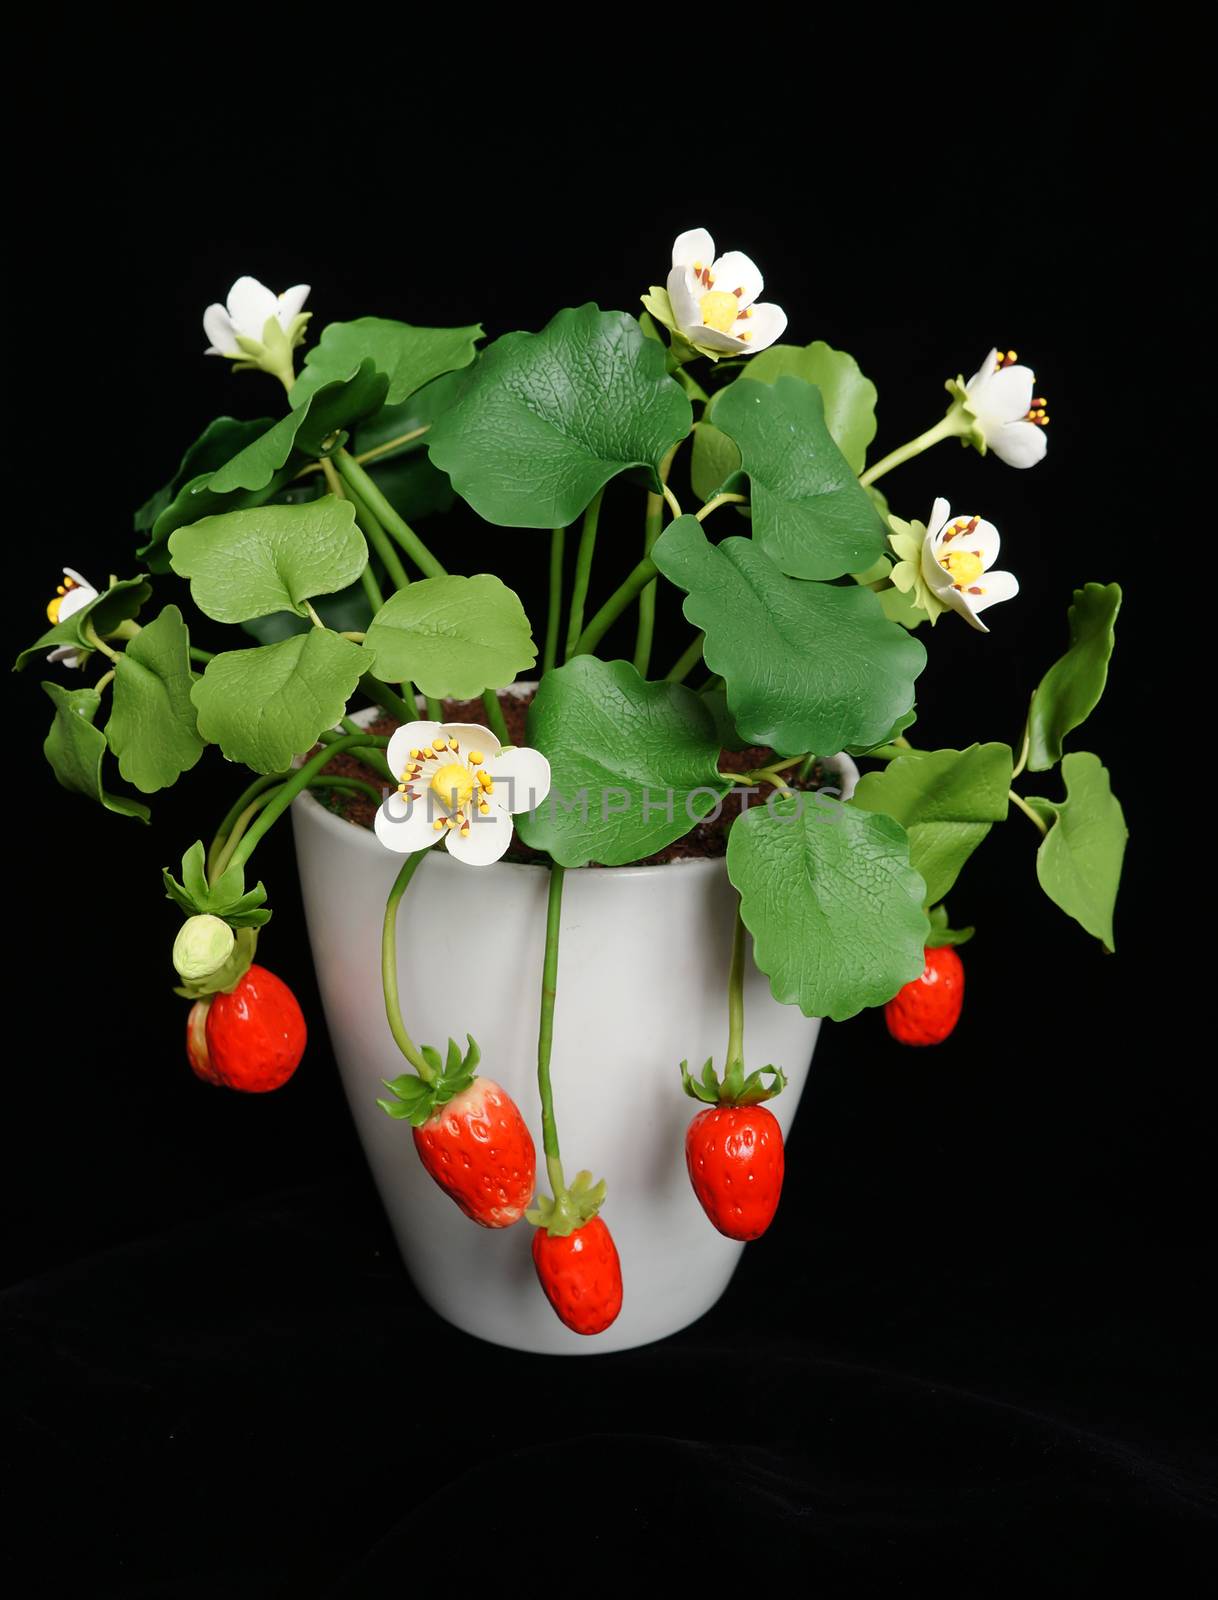 handmade product, clay flower, artificial flowers by xuanhuongho